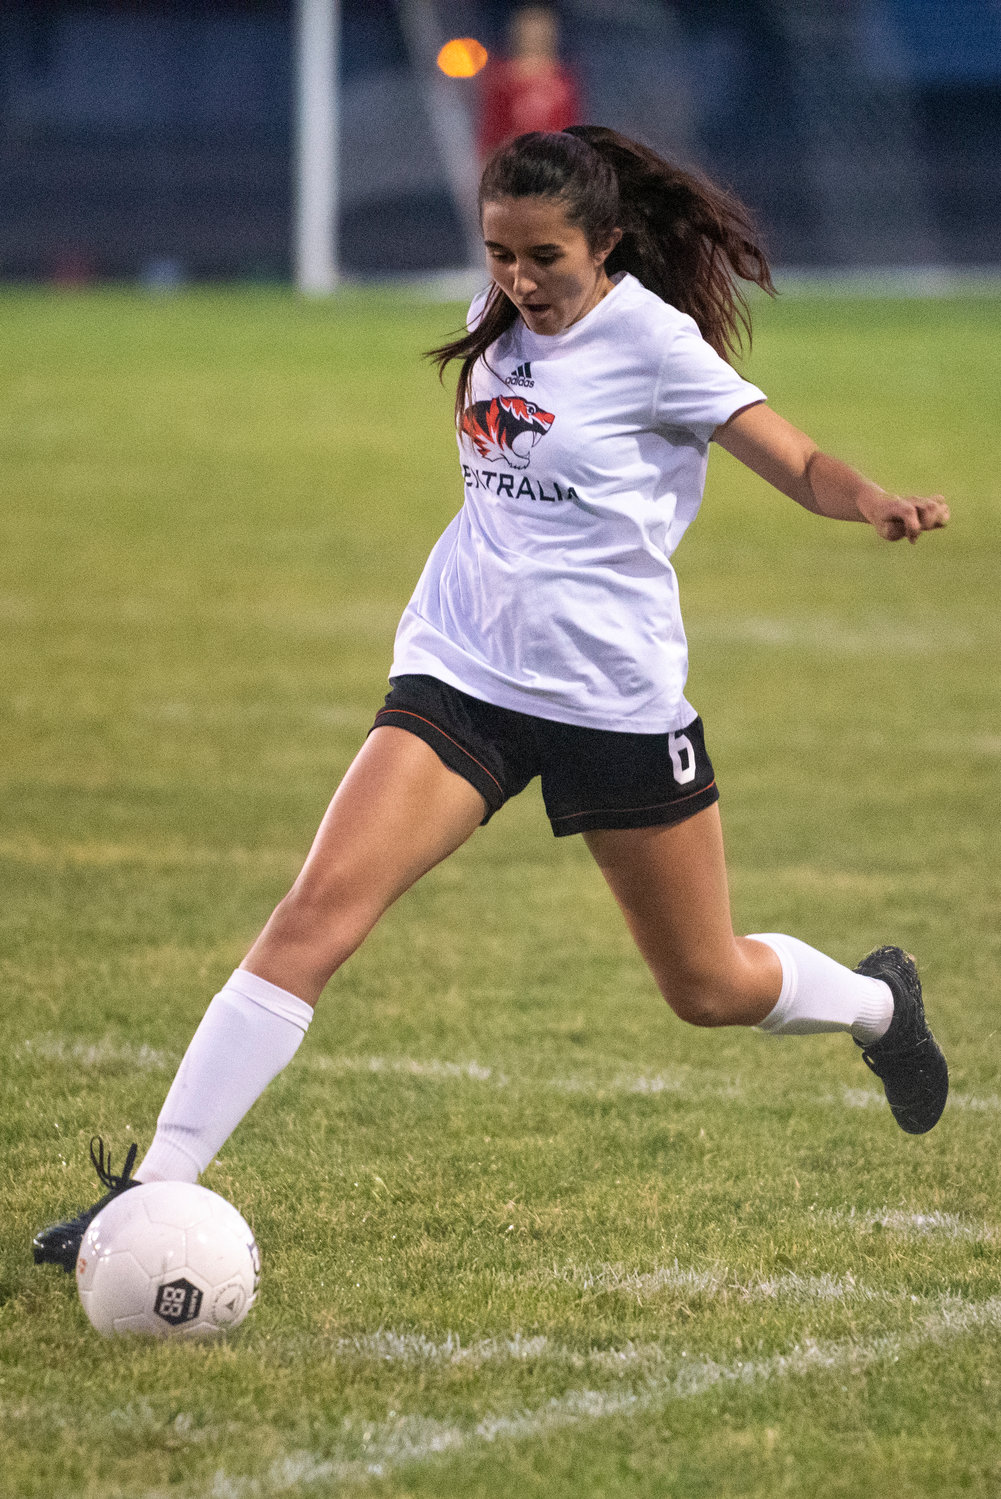 Centralia's Annabelle Lewis gains possession of the ball against Rochester on Thursday.